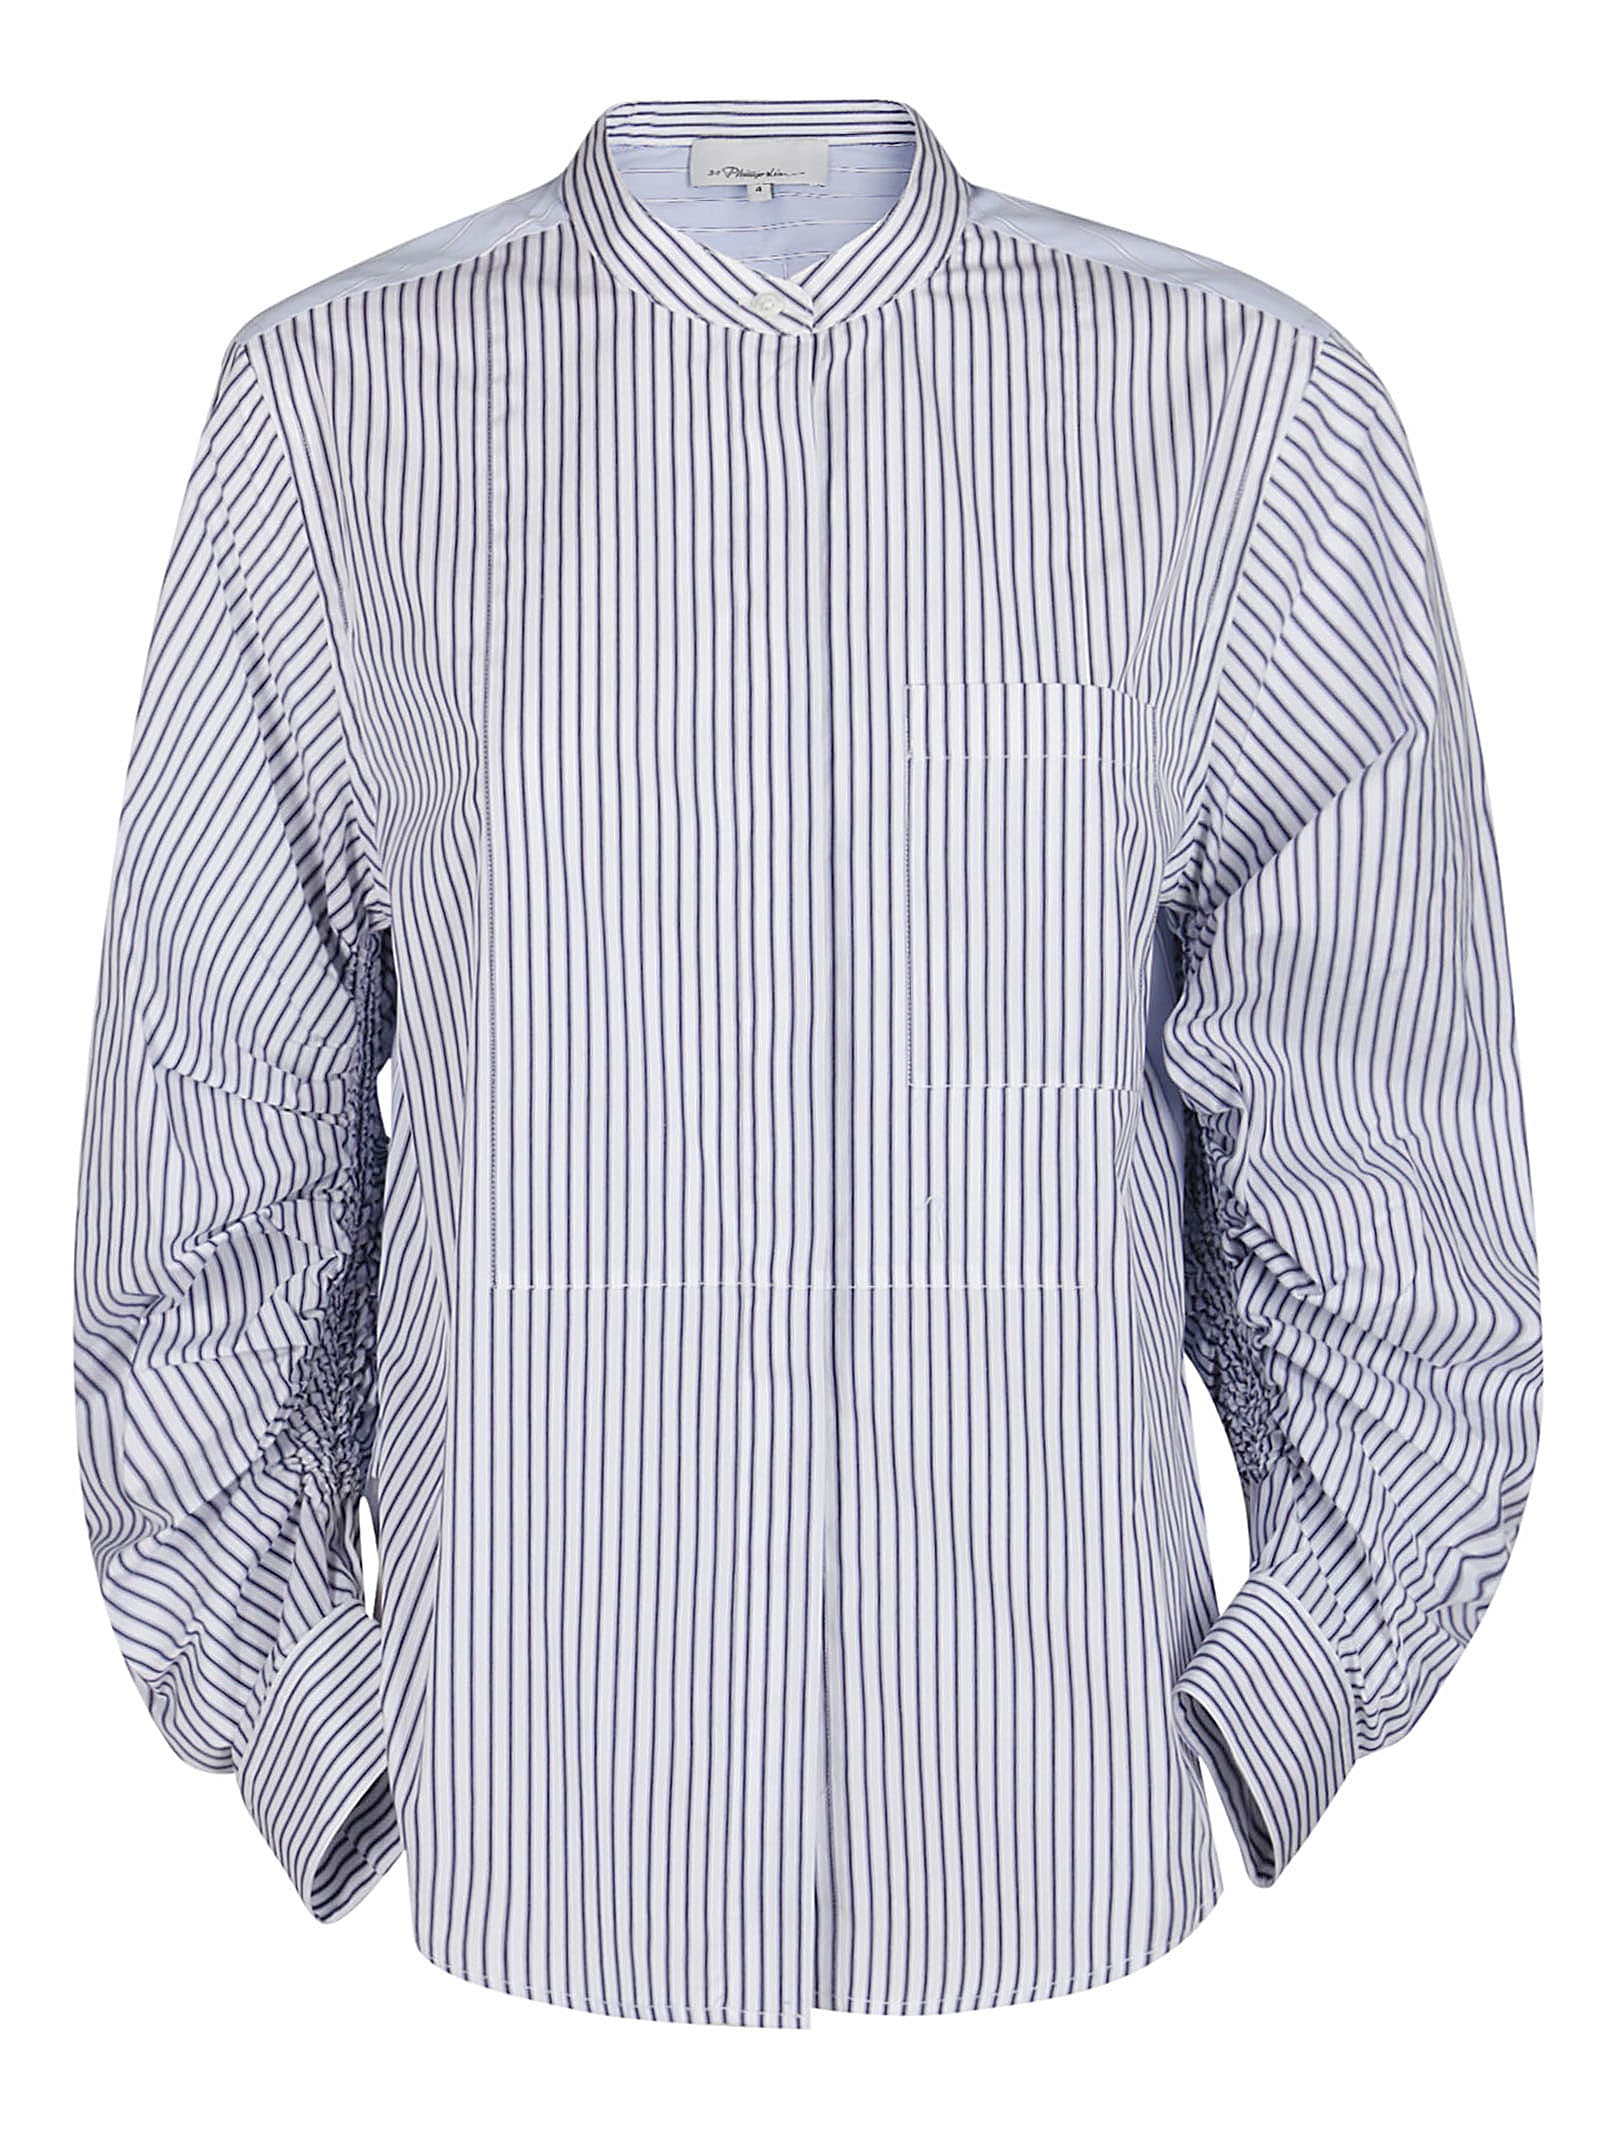 3.1 PHILLIP LIM / フィリップ リム WHITE AND BLUE COTTON BLEND SHIRT,11251983